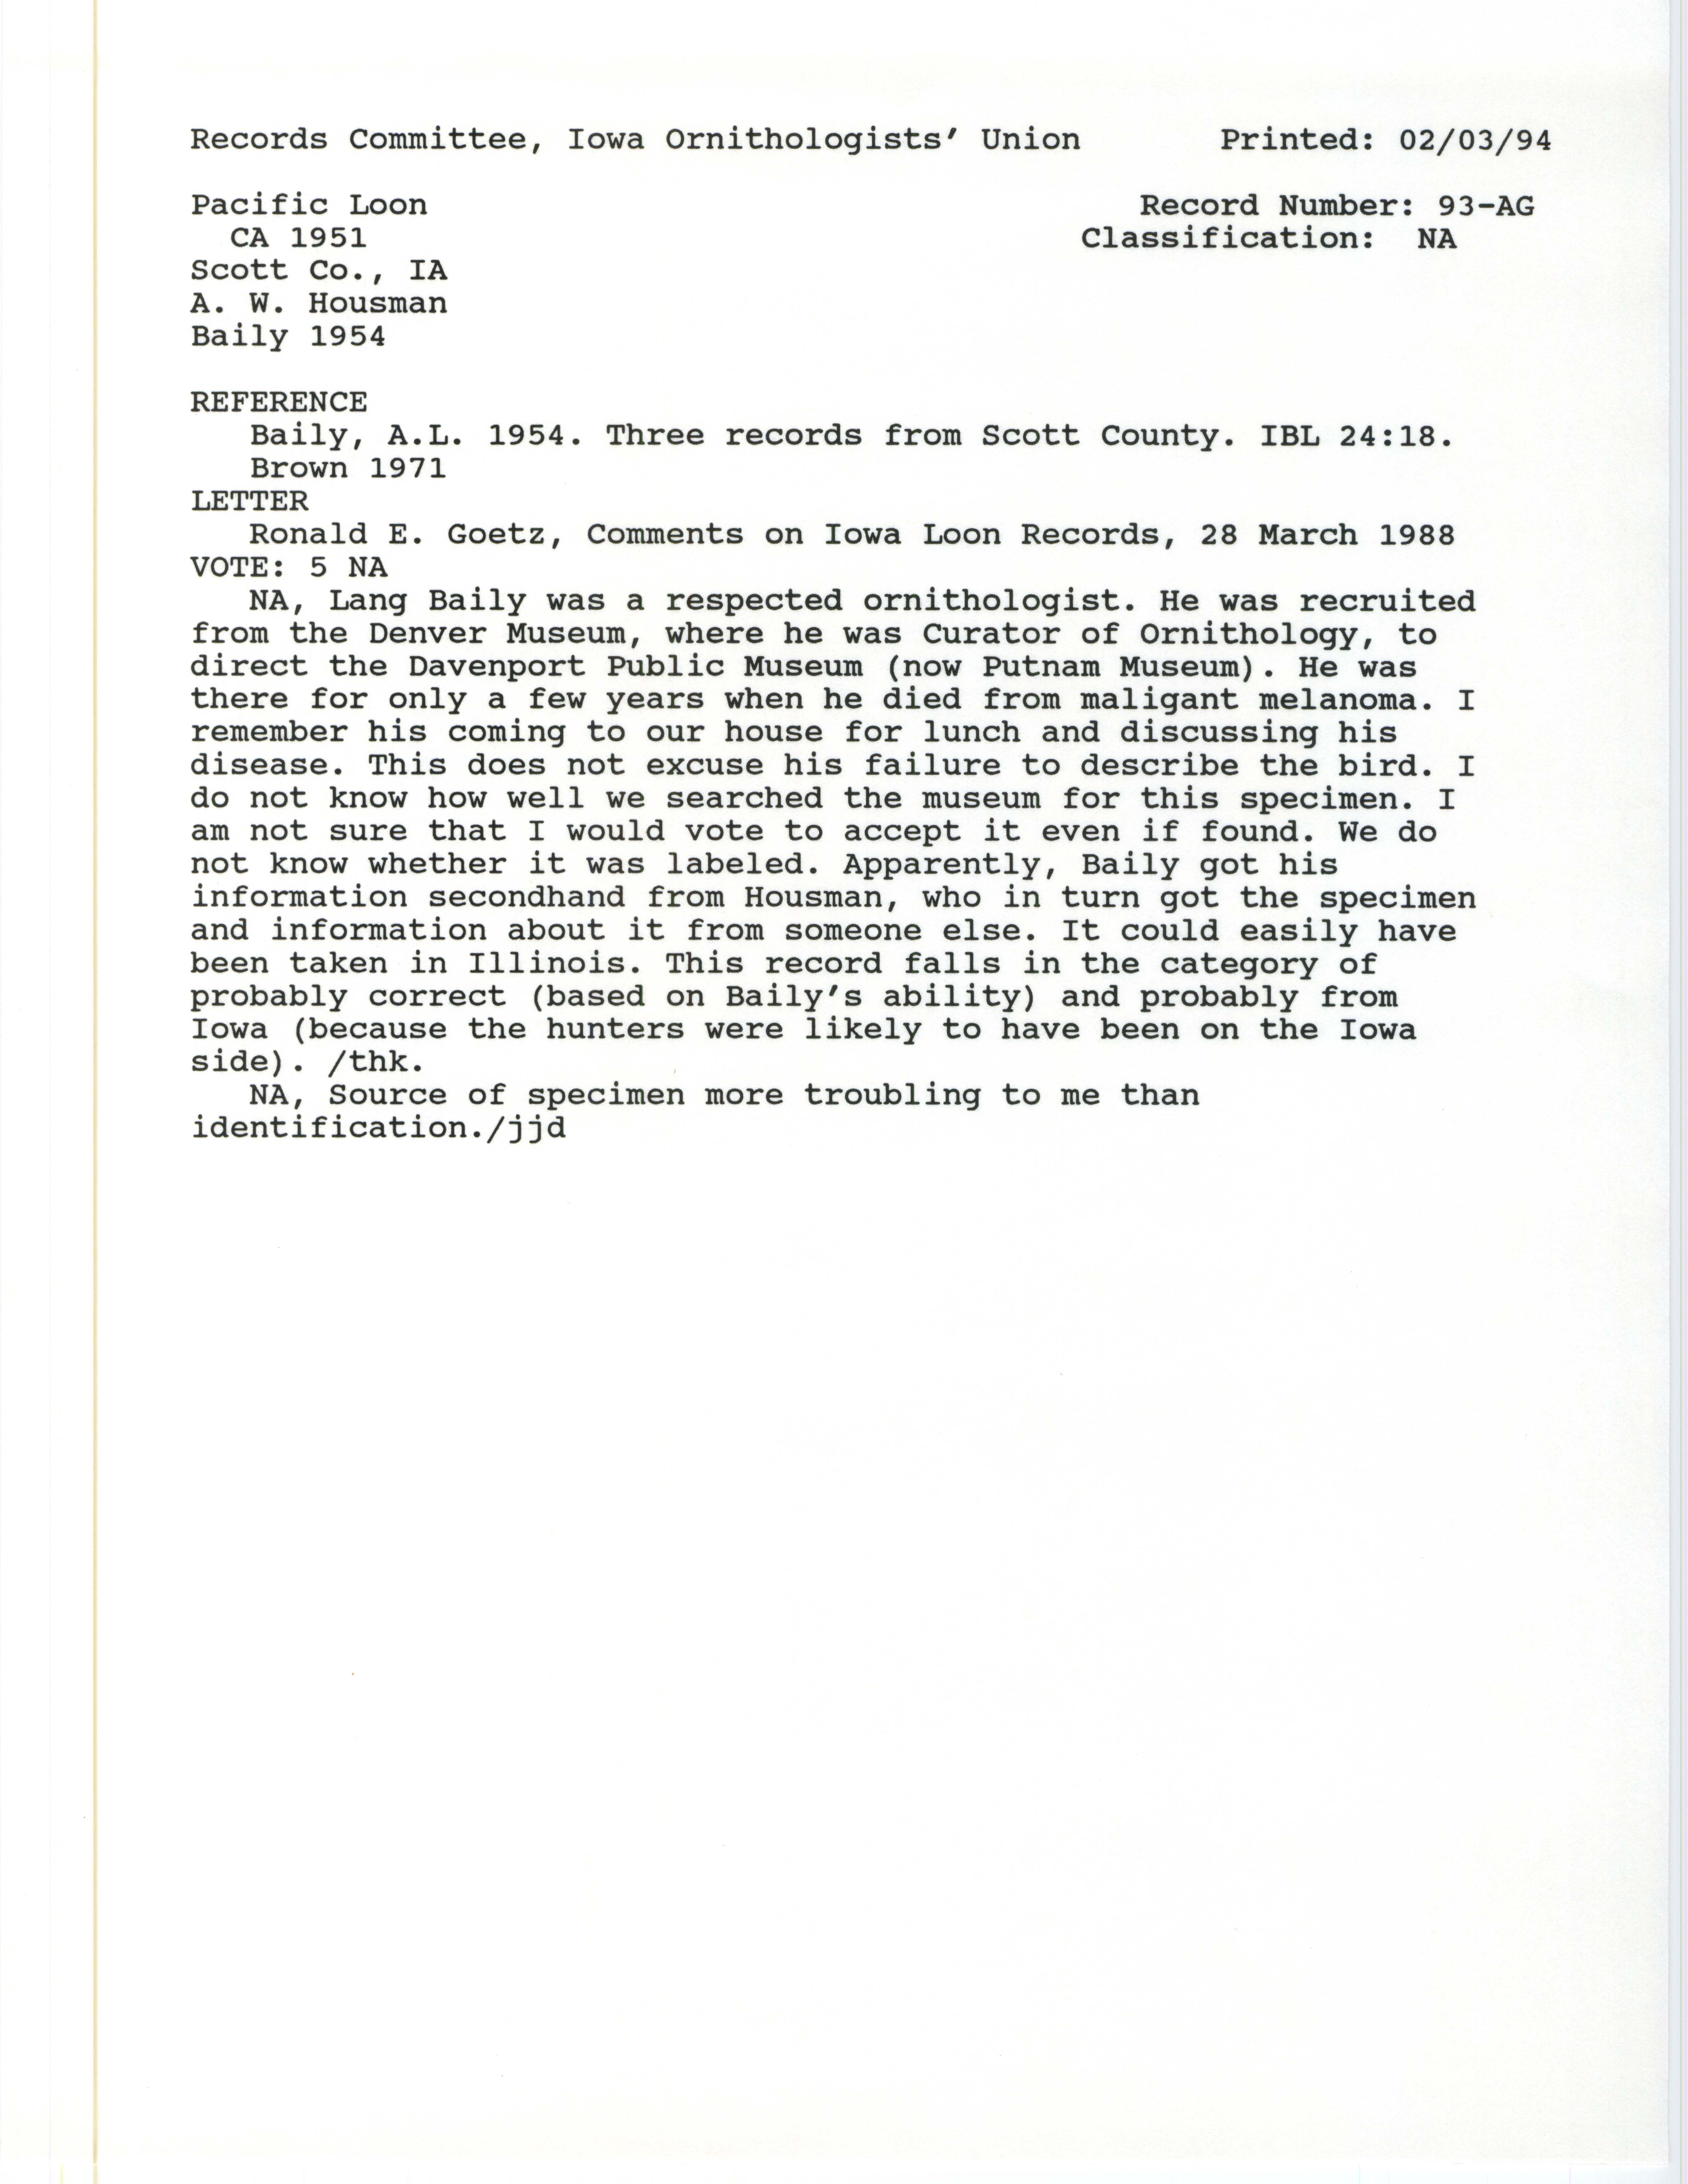 Records Committee review for rare bird sighting for Pacific Loon at Scott County, 1951